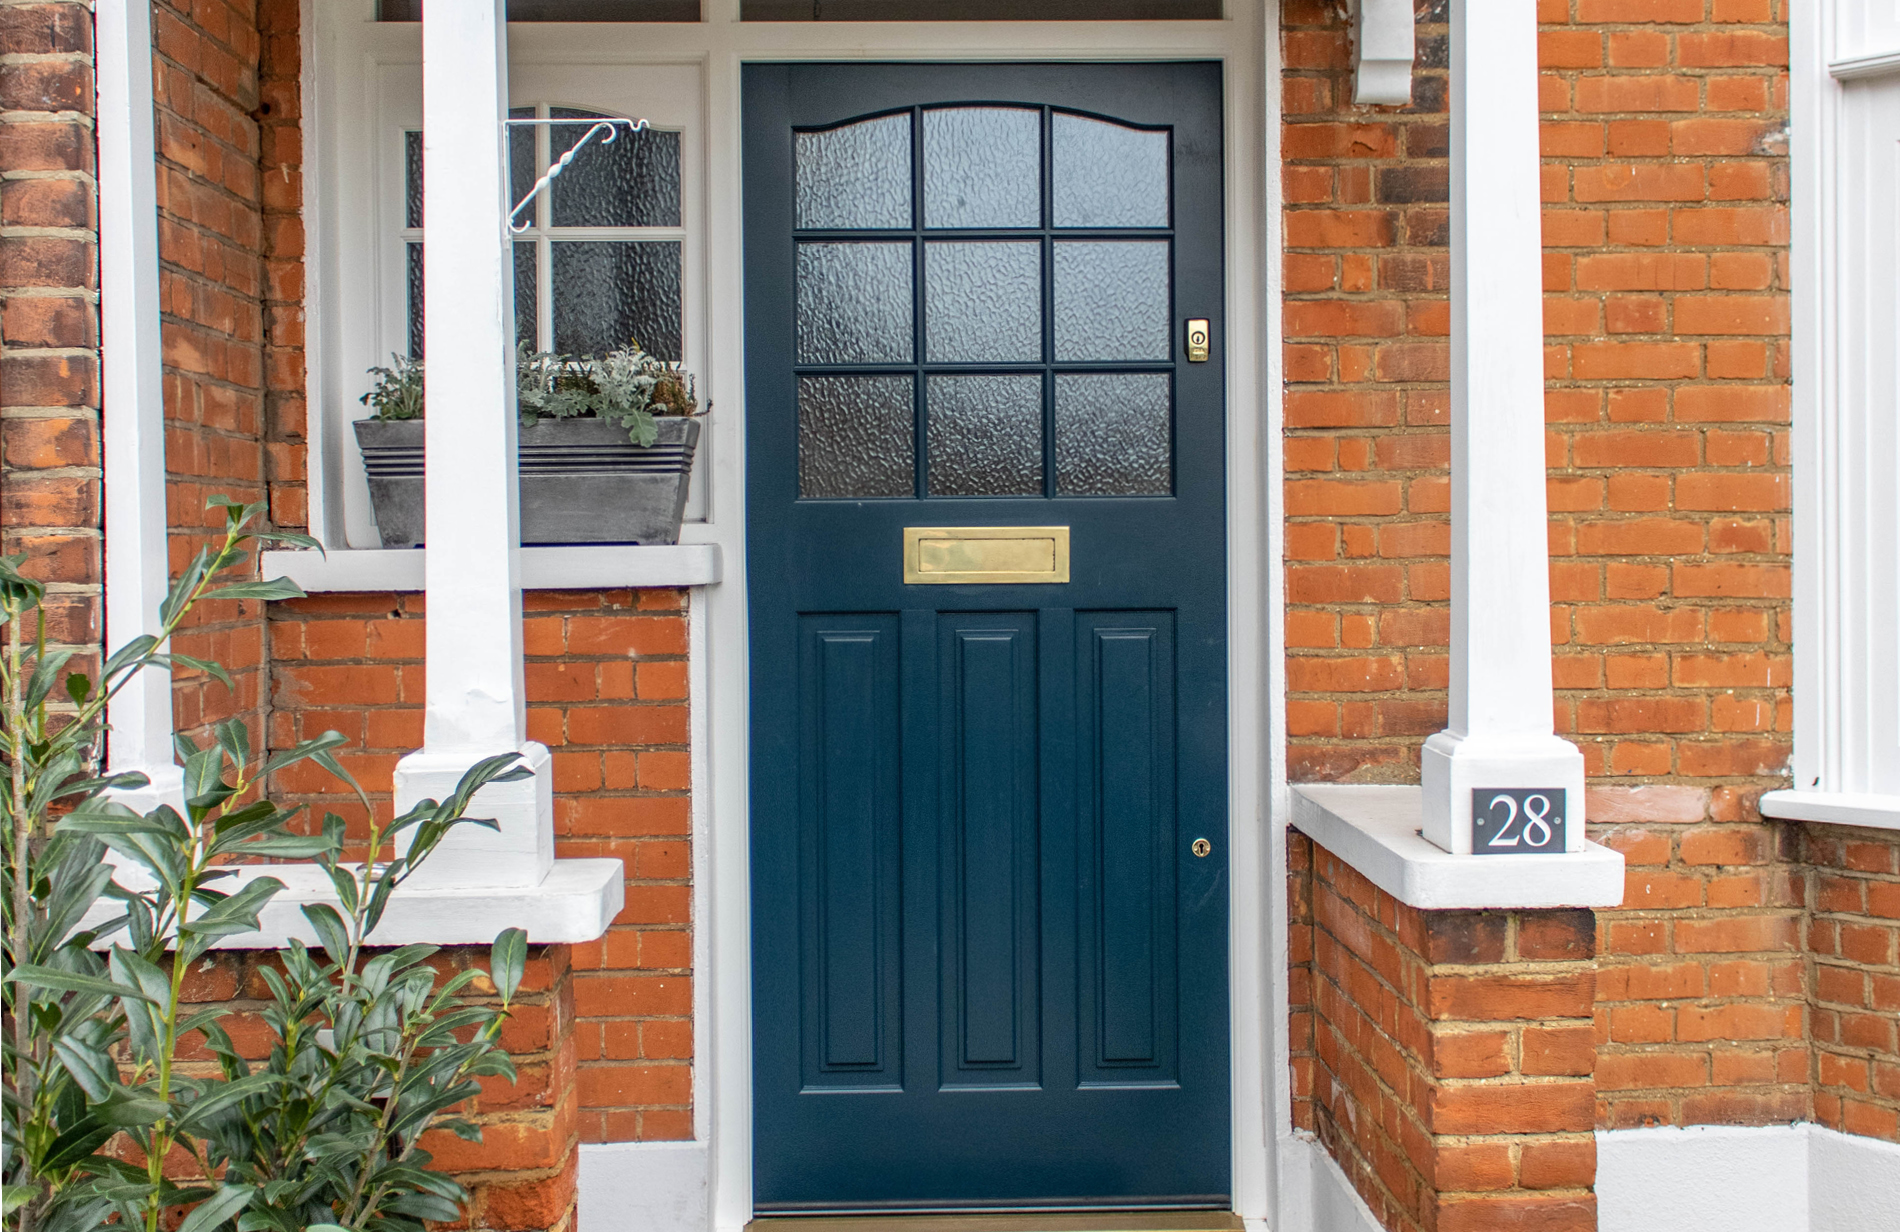 Cassic 1930s accoya front door with privacy glass by K and D Joinery